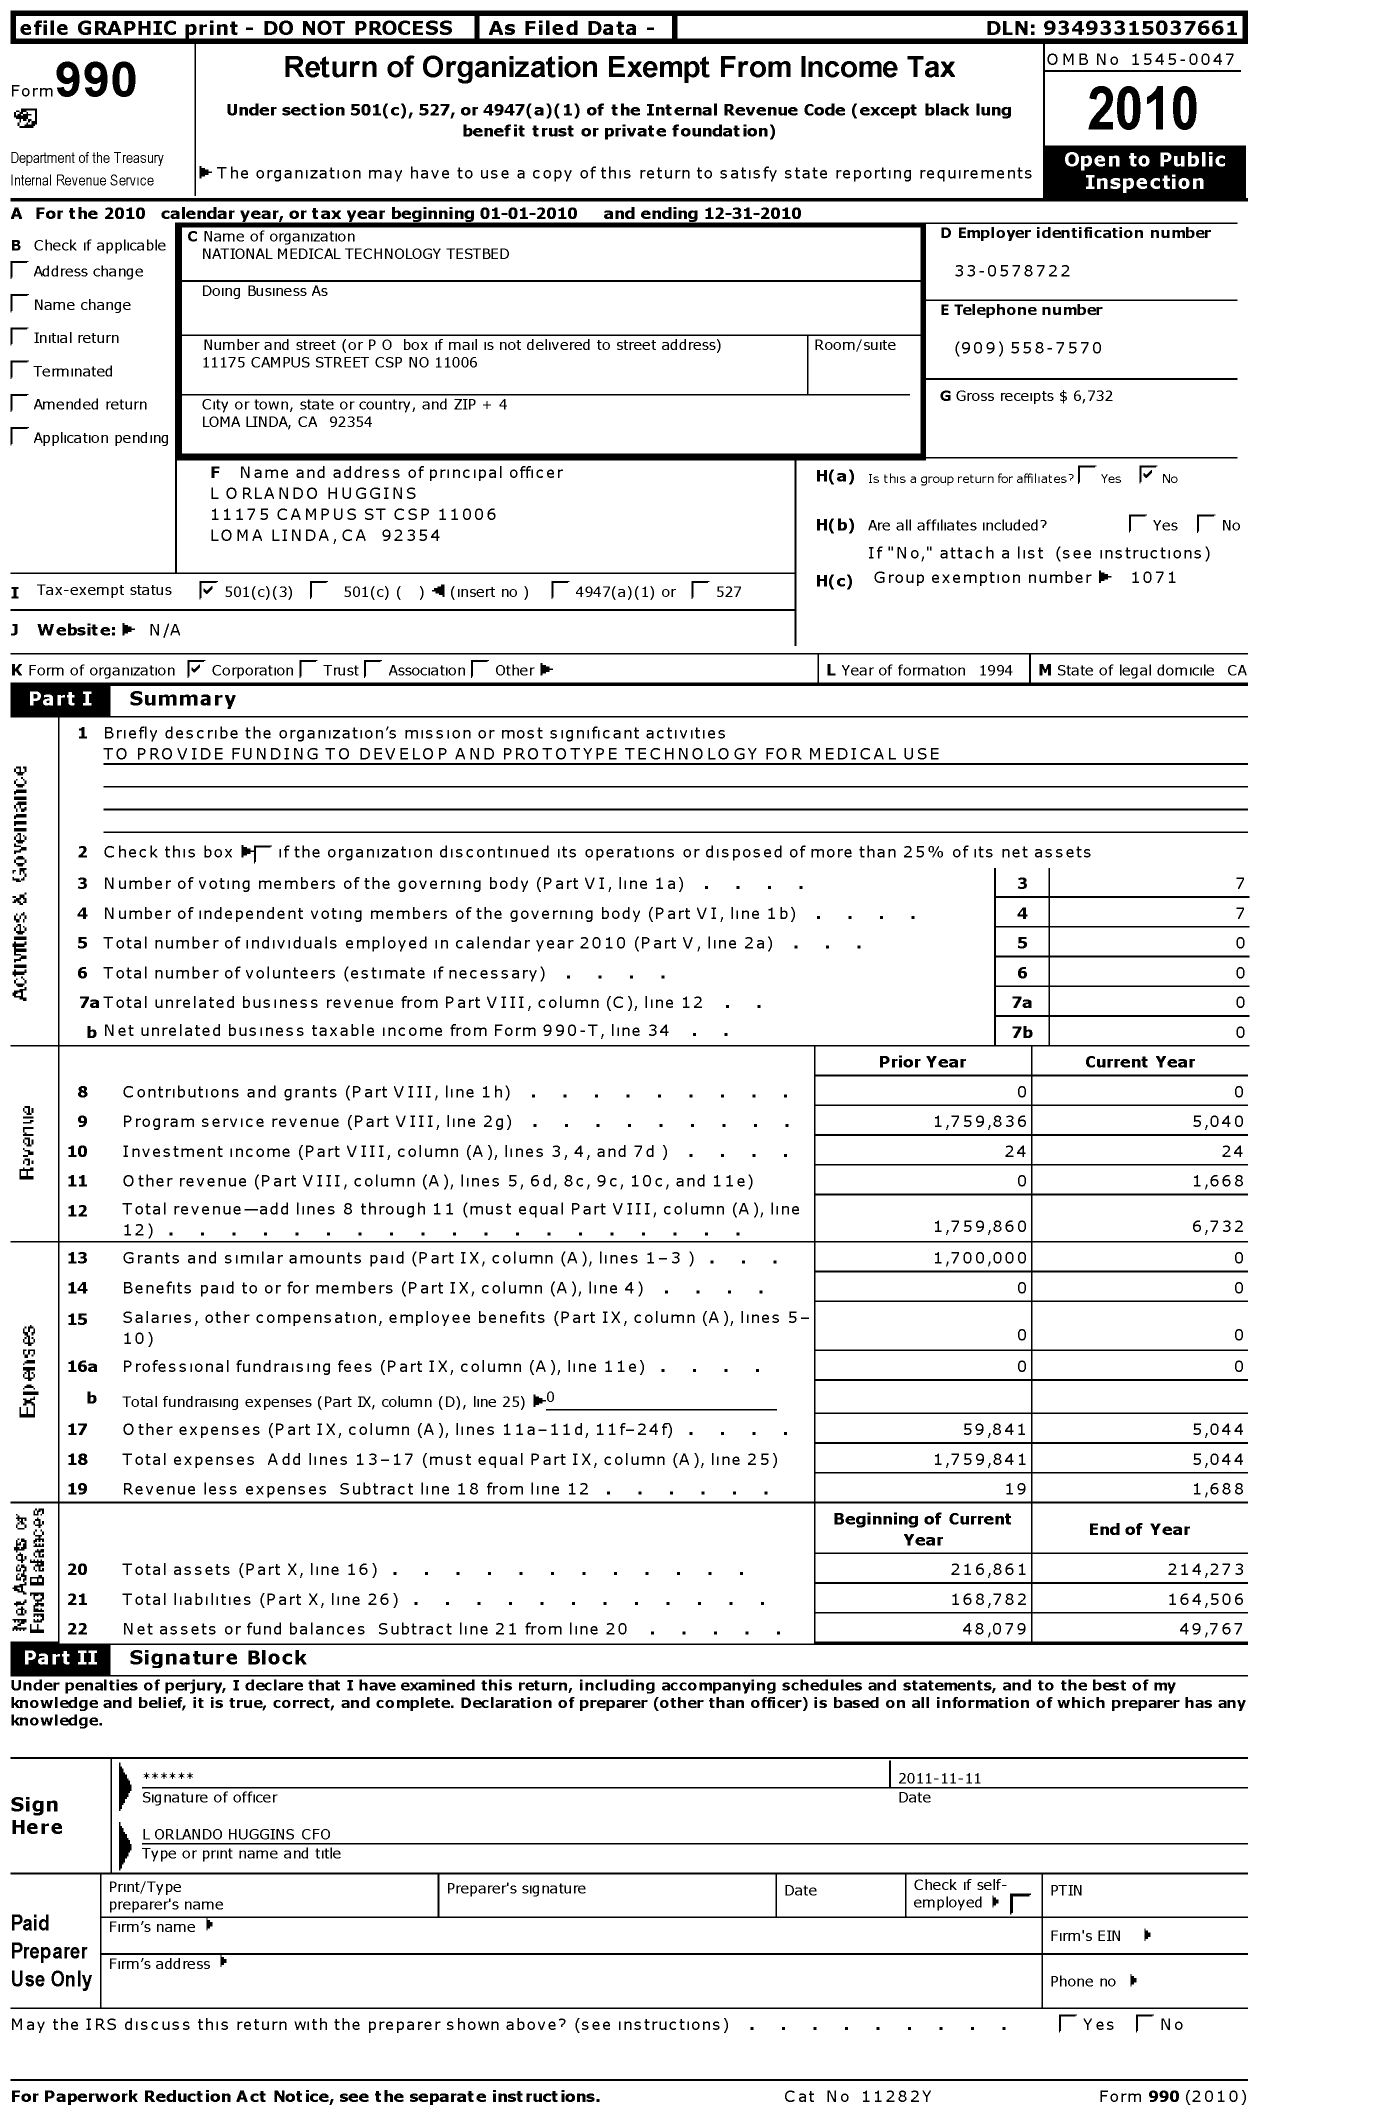 Image of first page of 2010 Form 990 for National Medical Technology Testbed